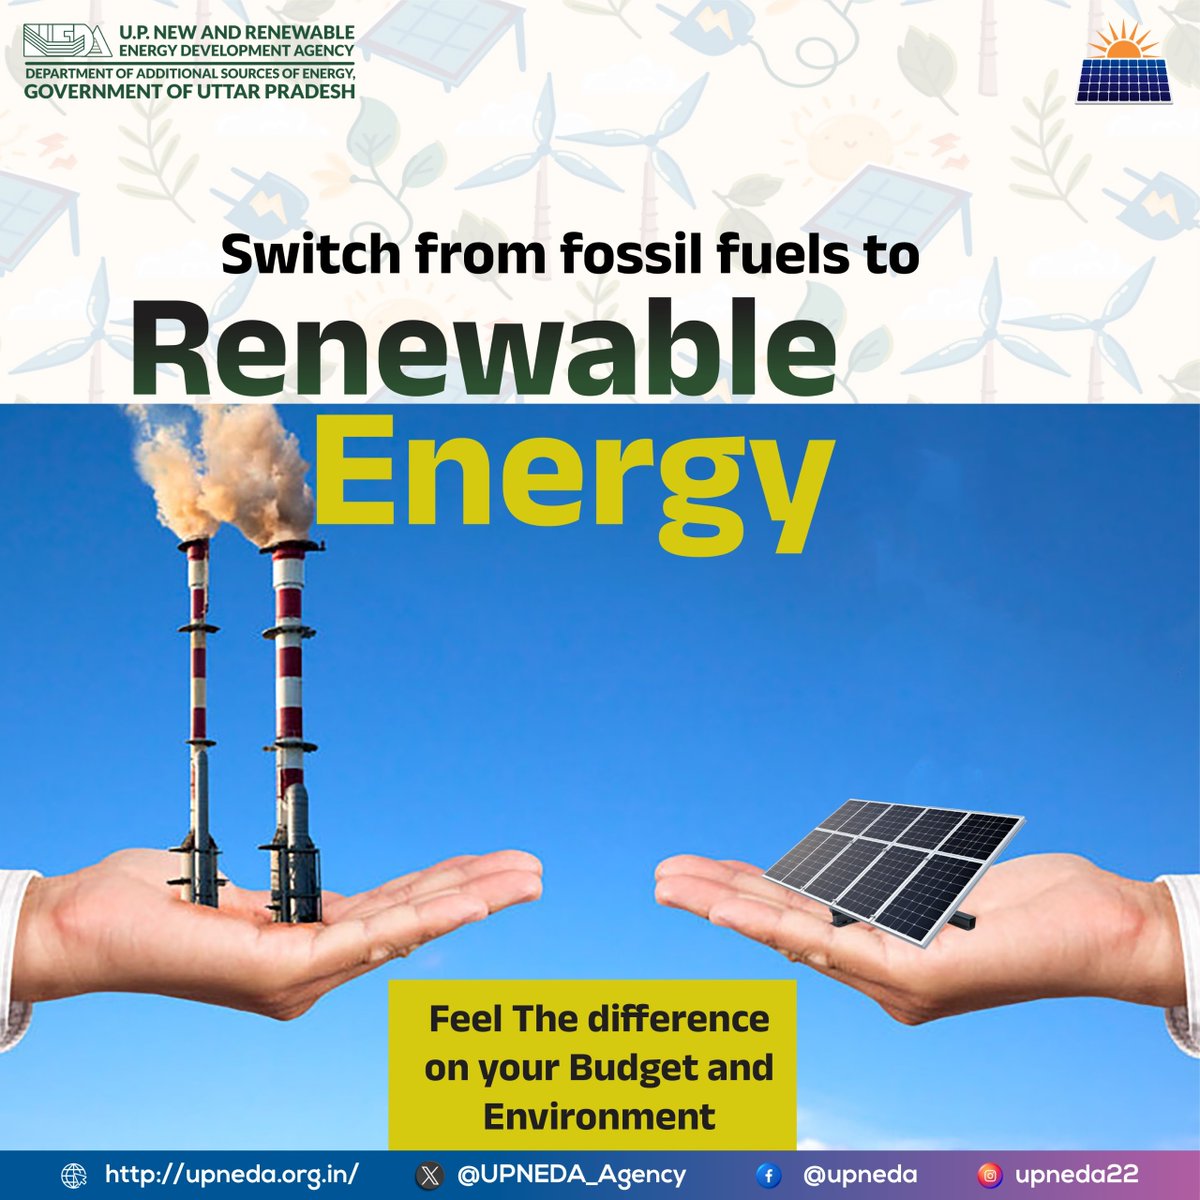 Transition to a greener future with us! Switch from fossil fuels to renewable energy and experience the positive impact on your budget and our environment. Let's build a sustainable future together! 

#SolarEnergy #RenewableEnergy #GreenerFuture #SustainableFuture #Gosolar